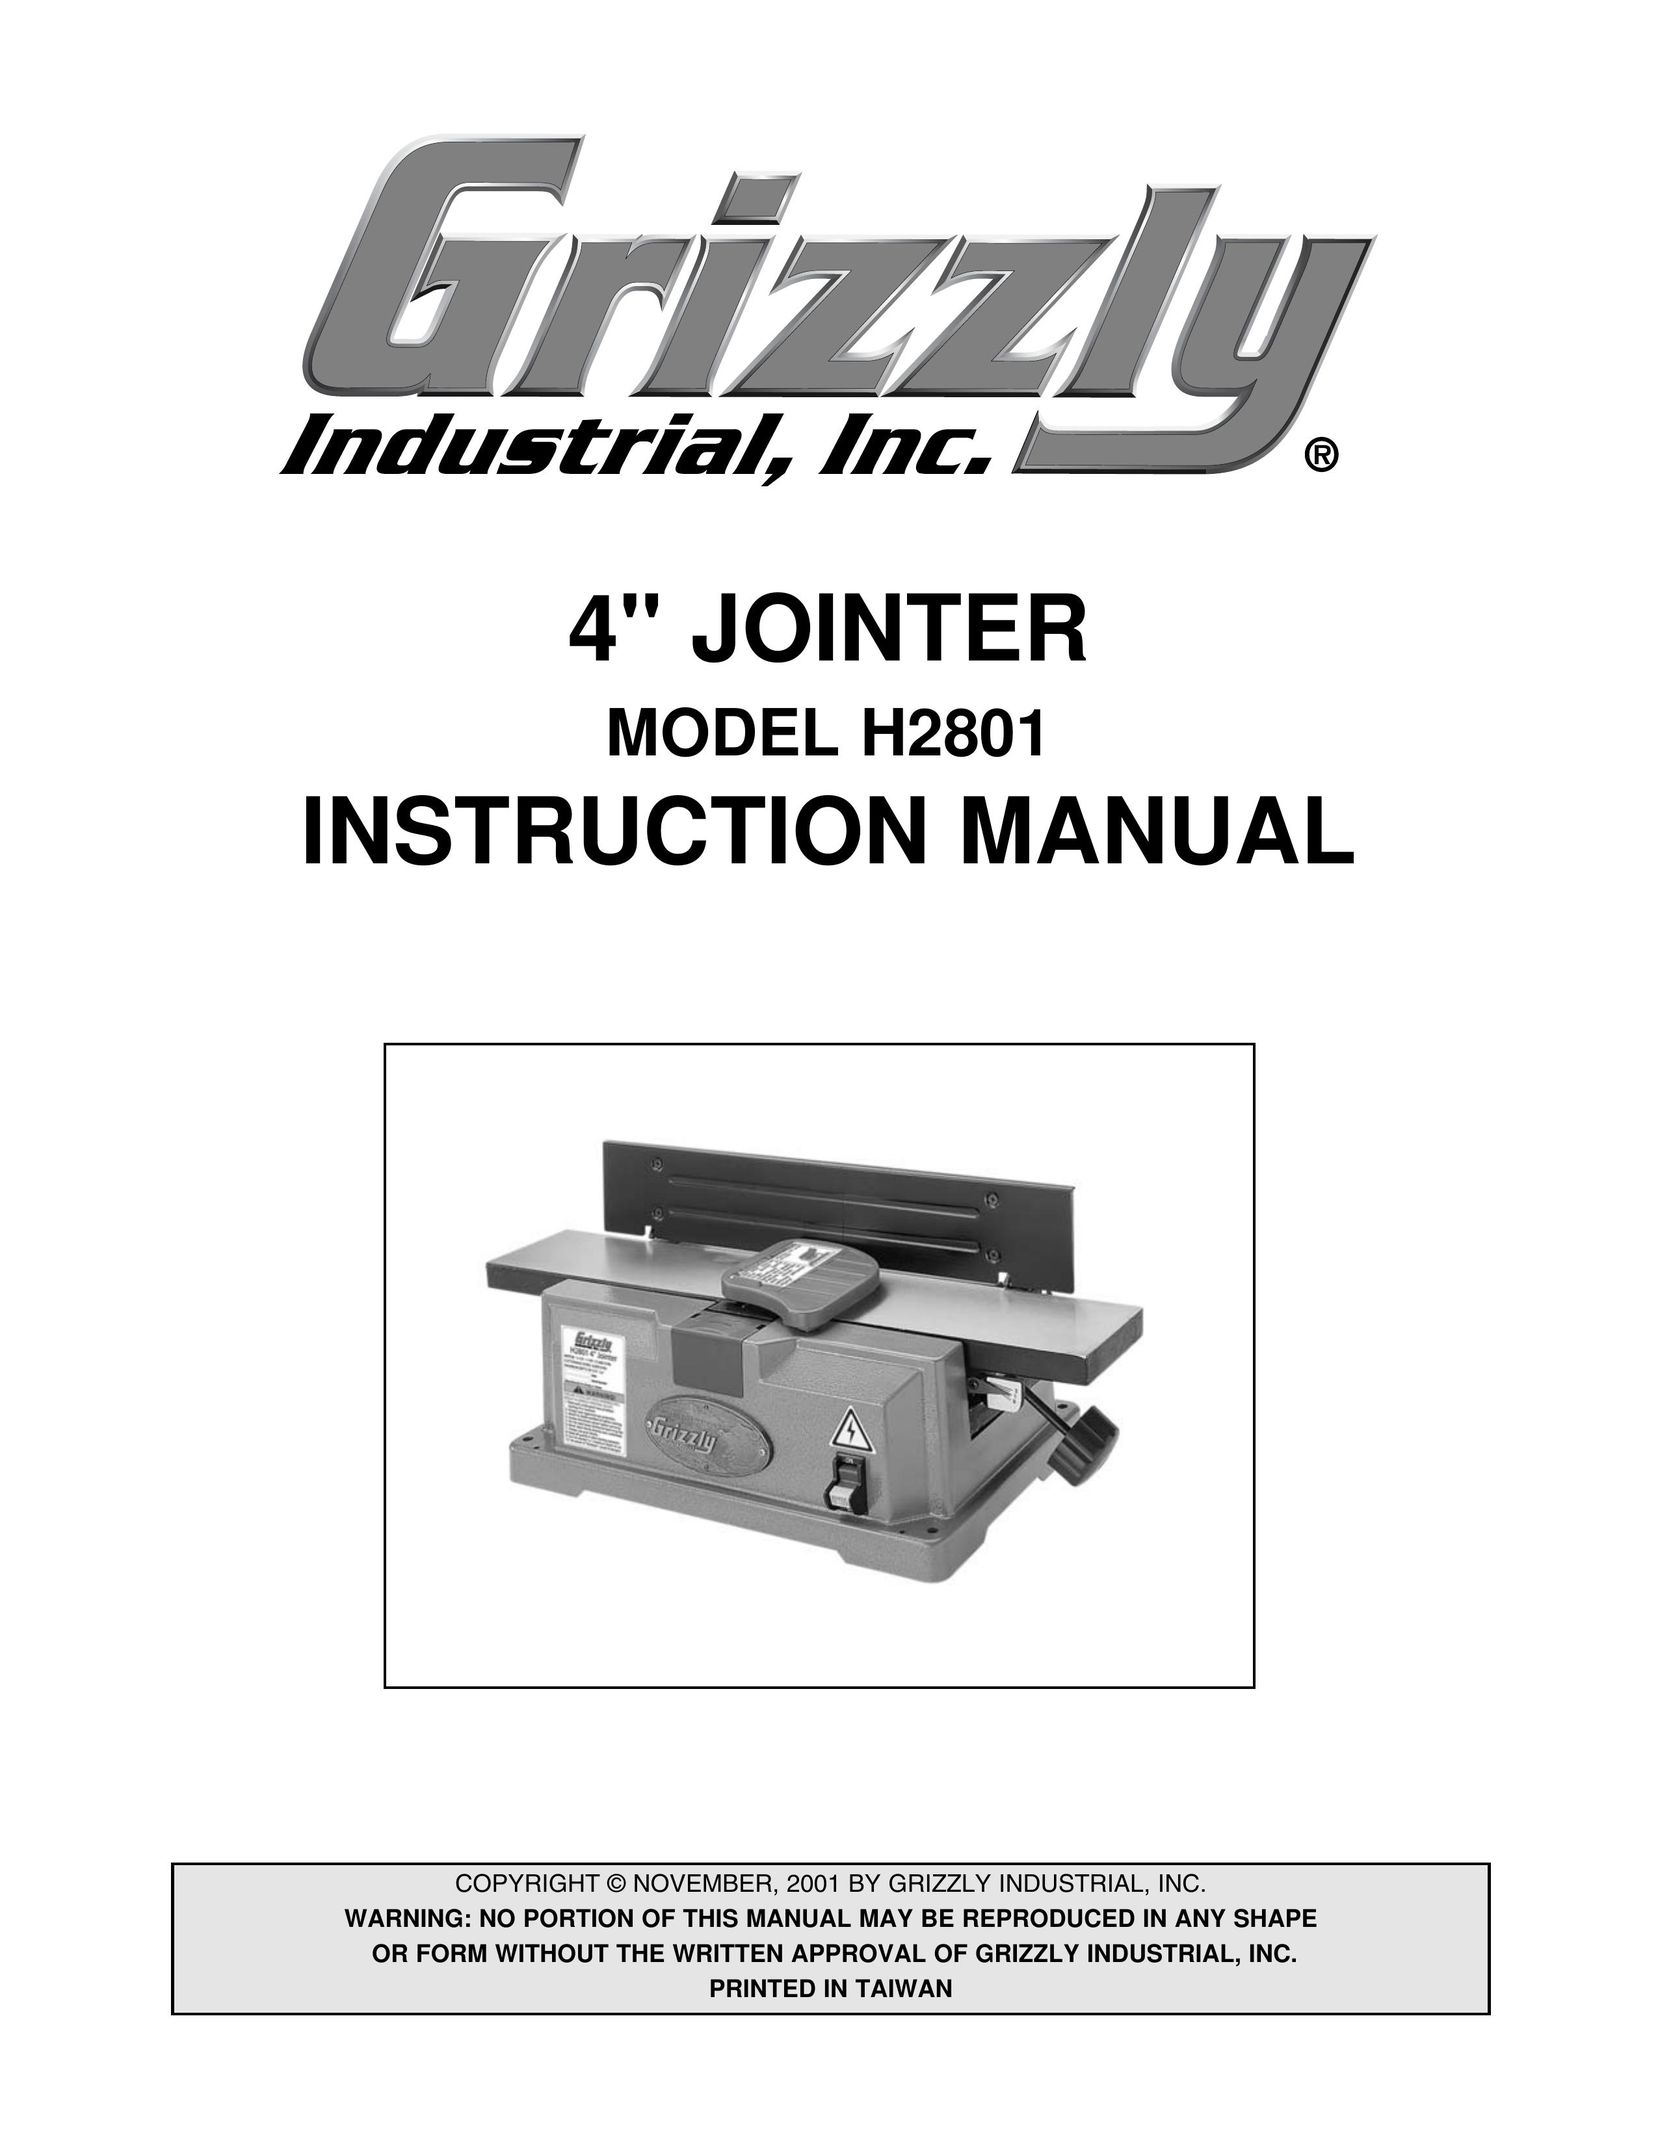 Grizzly H2801 Biscuit Joiner User Manual (Page 1)